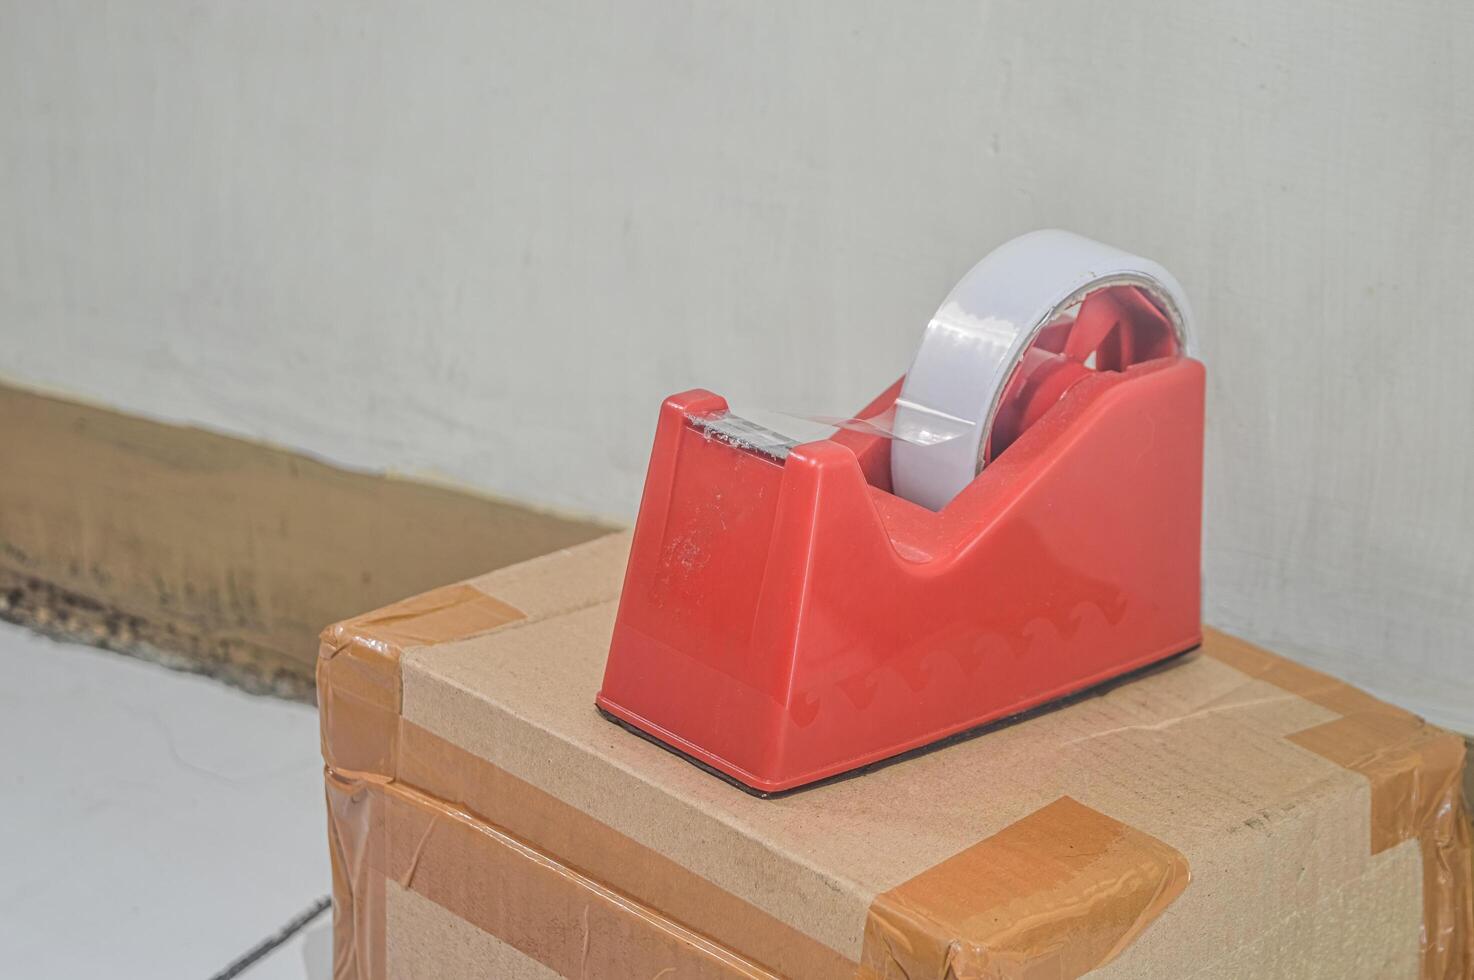 cardboard box insulated with tape for sending packages with a red tape dispenser on top photo